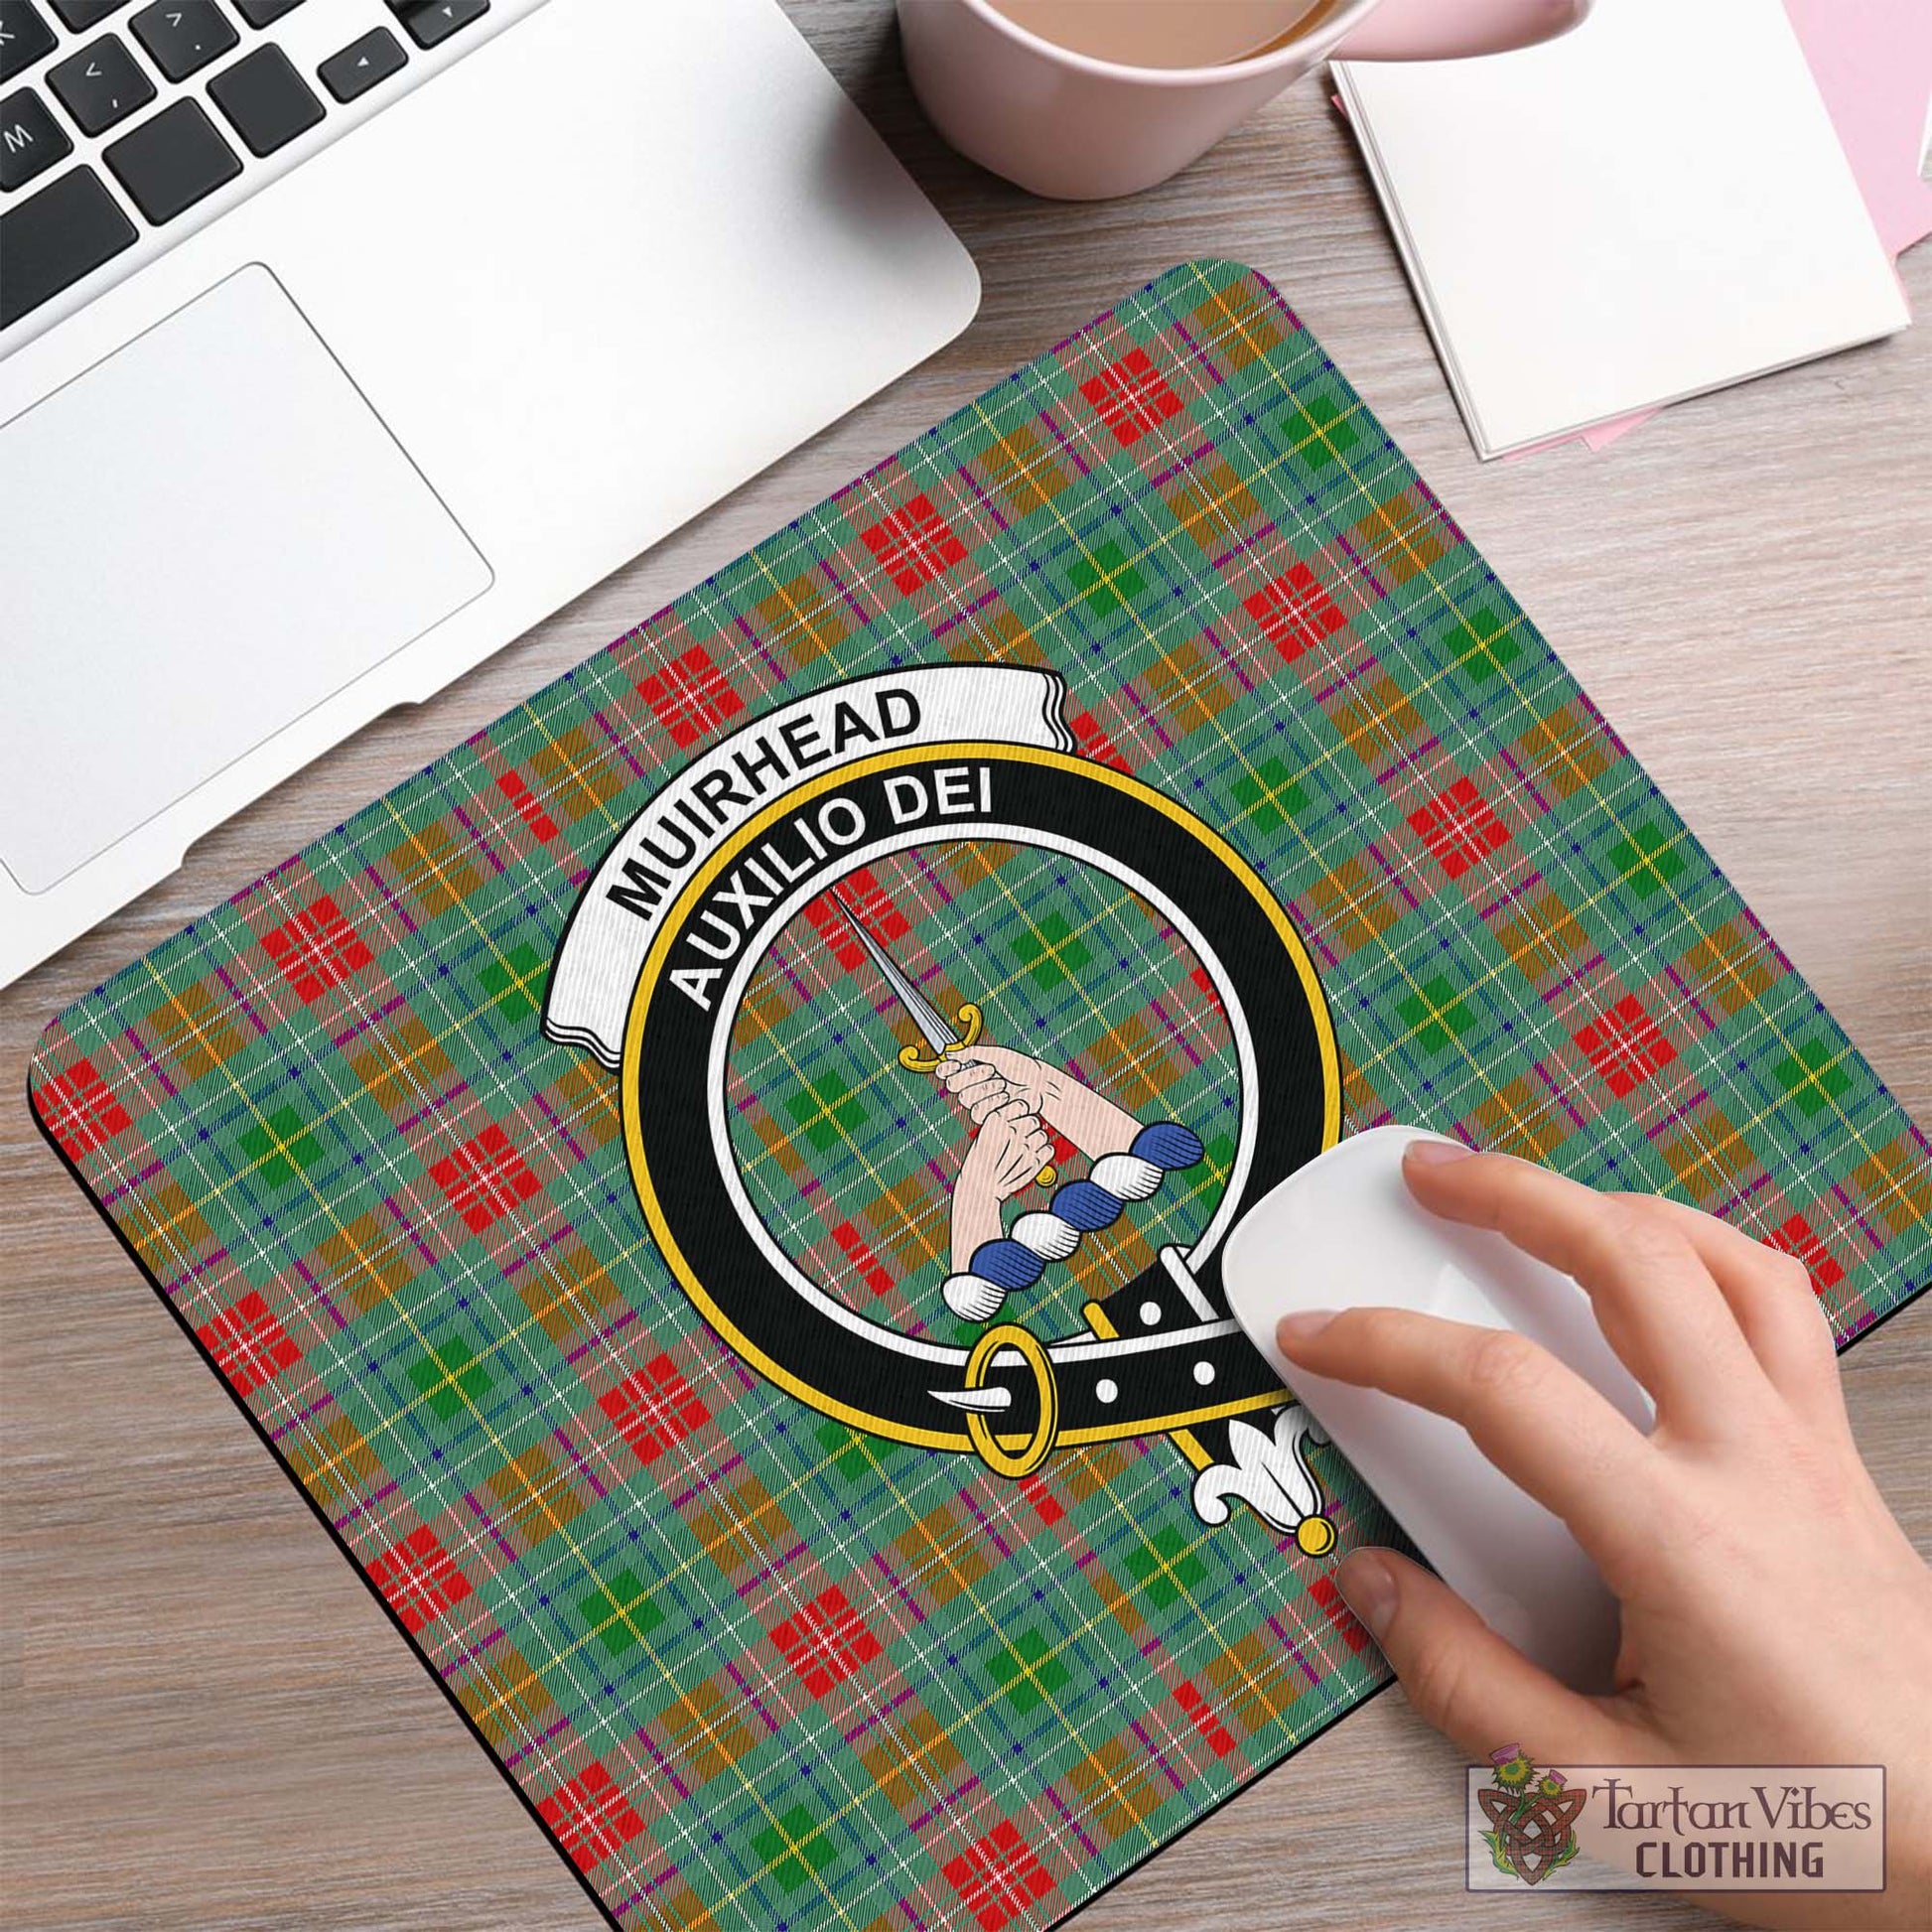 Tartan Vibes Clothing Muirhead Tartan Mouse Pad with Family Crest